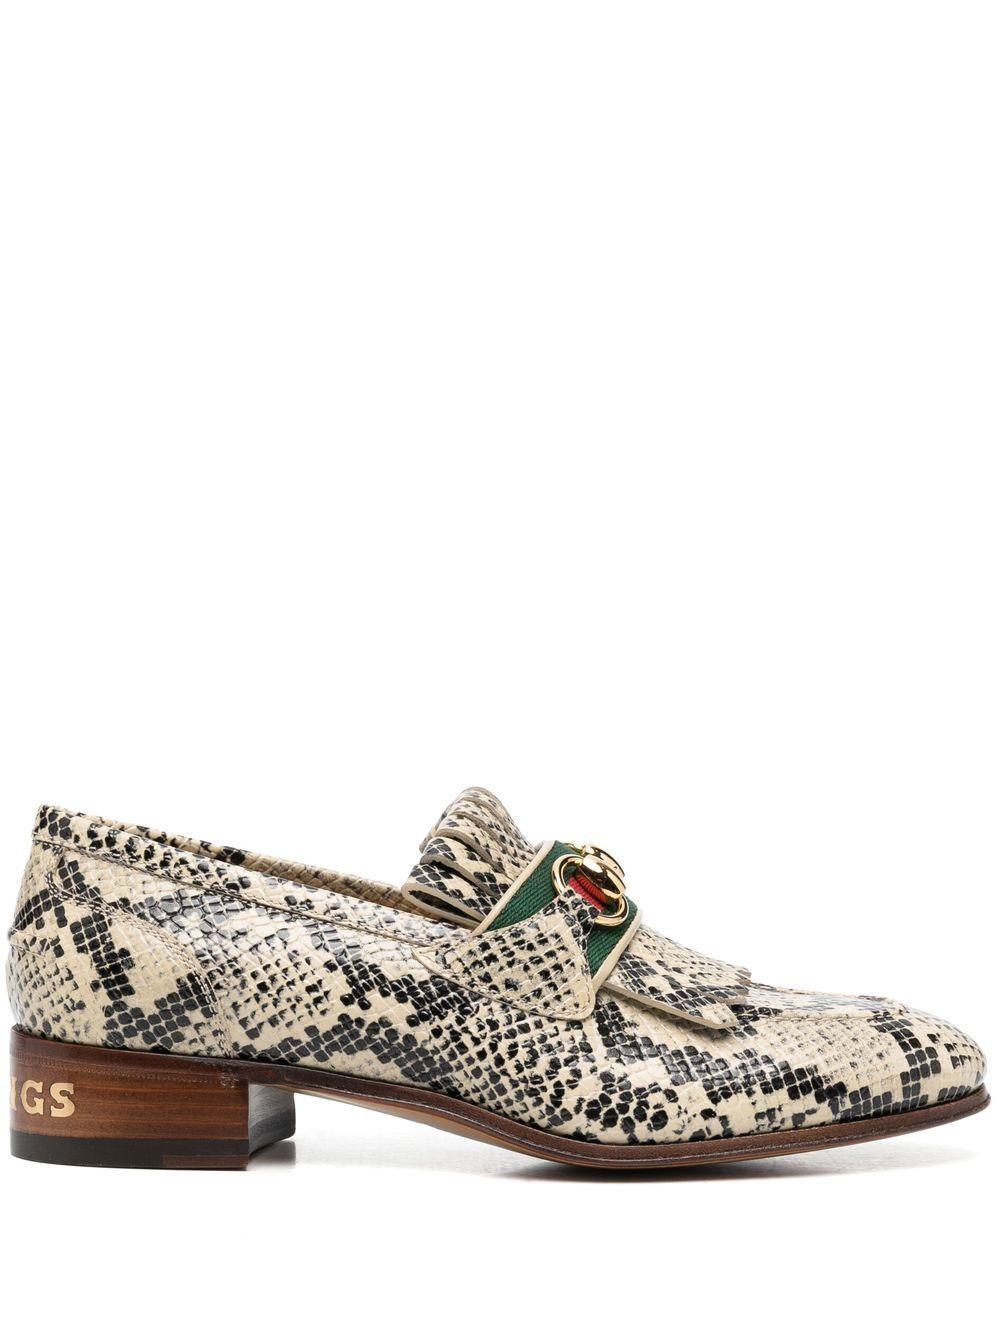 Gucci Horsebit Snake-effect Leather Loafers | Lyst